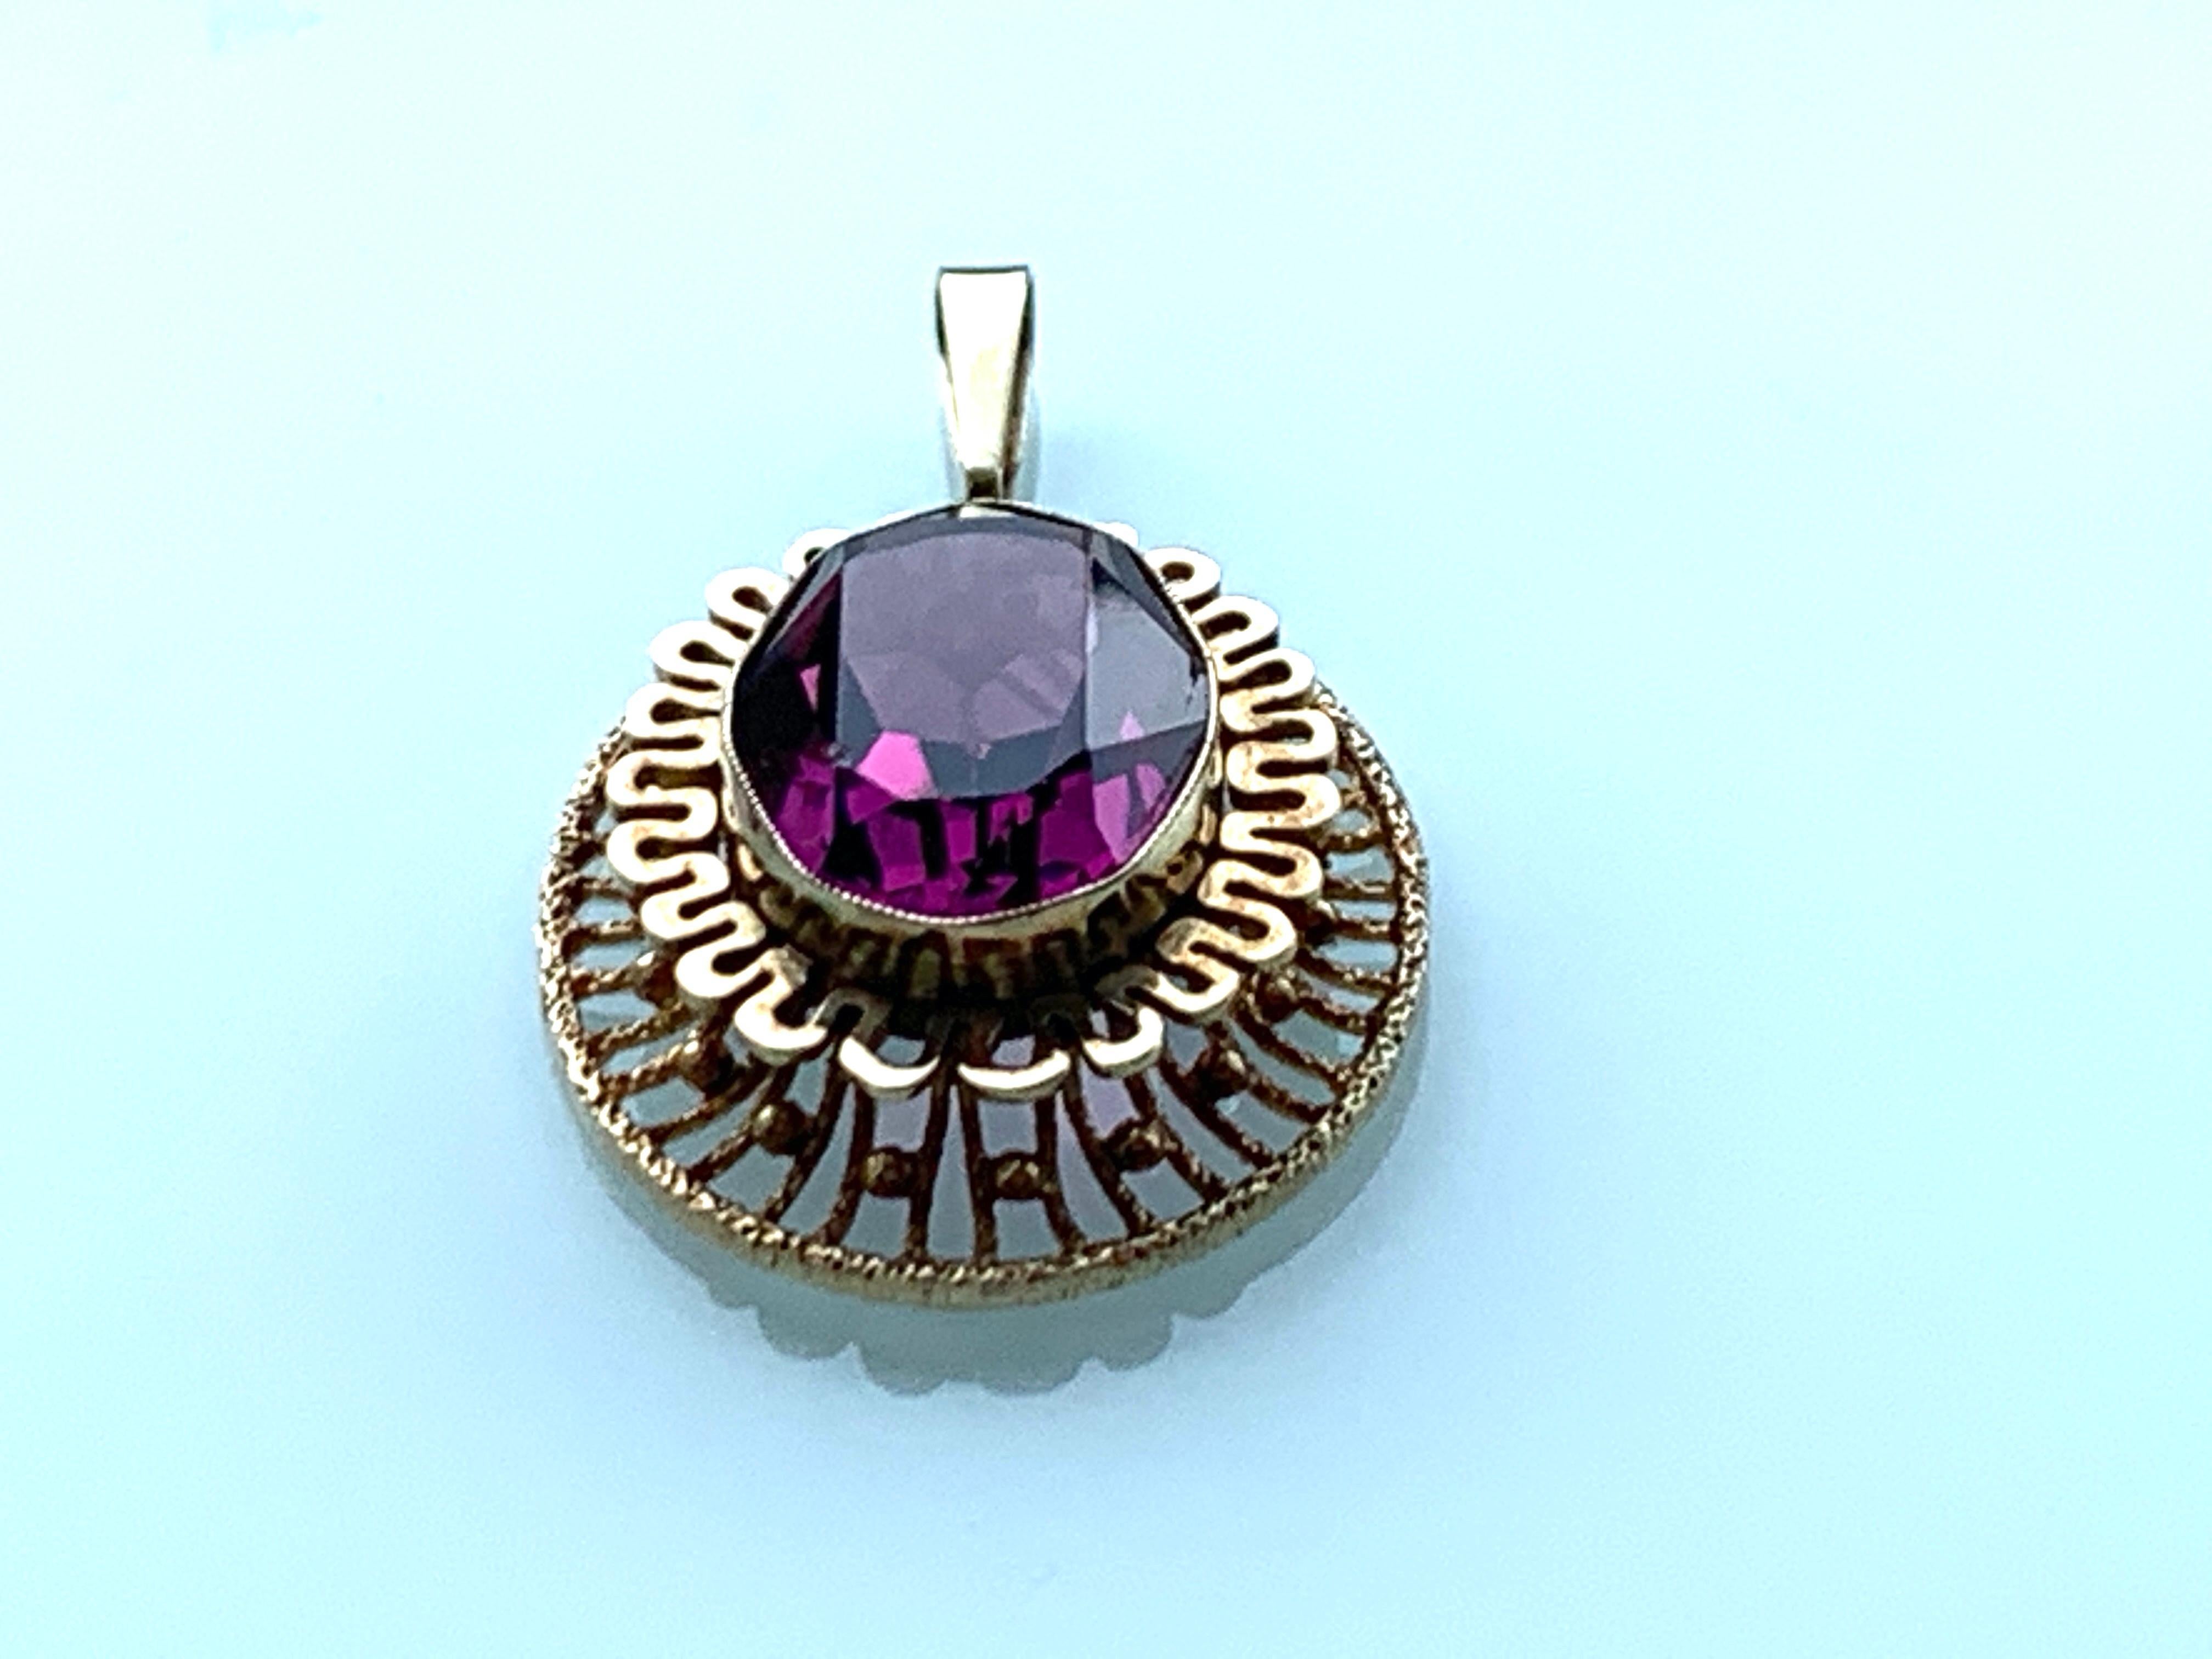 9ct Gold Large Pendant 
with unknown Purple Faceted Gemstone
Beautiful Statement piece of jewellery.
Era 1970s
Makers Stamps A&D